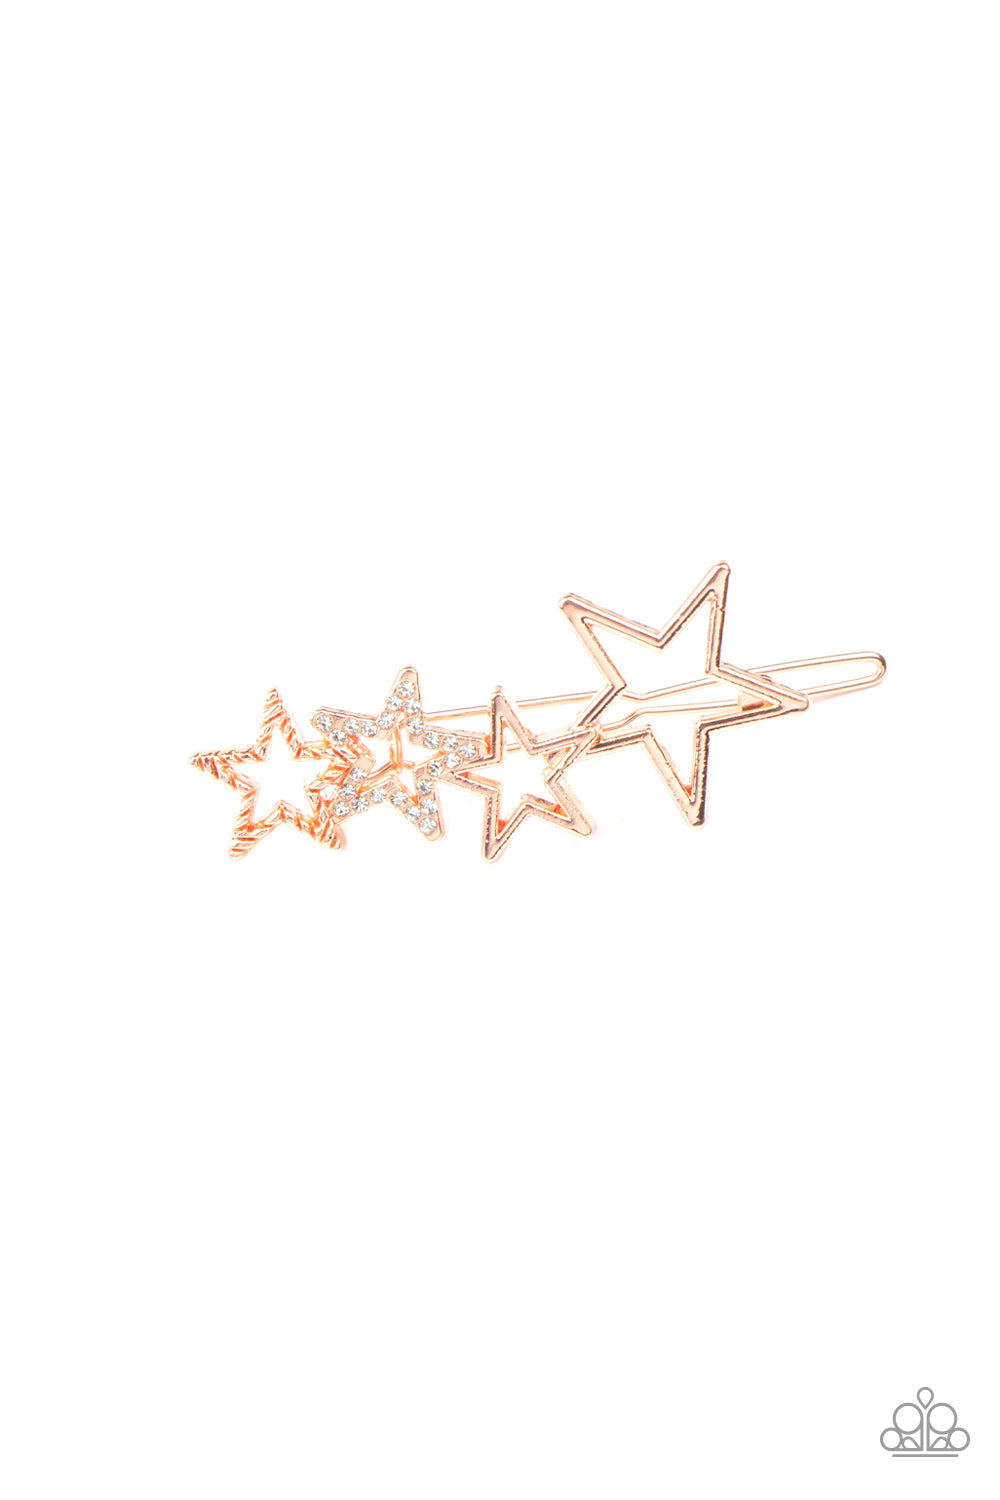 &lt;P&gt;Featuring shiny, textured, and white rhinestone encrusted finishes, a collection of shiny copper stars coalesce into a stellar frame. Features a clamp barrette closure.&lt;/P&gt;

&lt;P&gt;&lt;I&gt;Sold as one individual hair clip.&lt;/I&gt;&lt;/P&gt;


&lt;img src=\&quot;https://d9b54x484lq62.cloudfront.net/paparazzi/shopping/images/517_tag150x115_1.png\&quot; alt=\&quot;New Kit\&quot; align=\&quot;middle\&quot; height=\&quot;50\&quot; width=\&quot;50\&quot;/&gt;